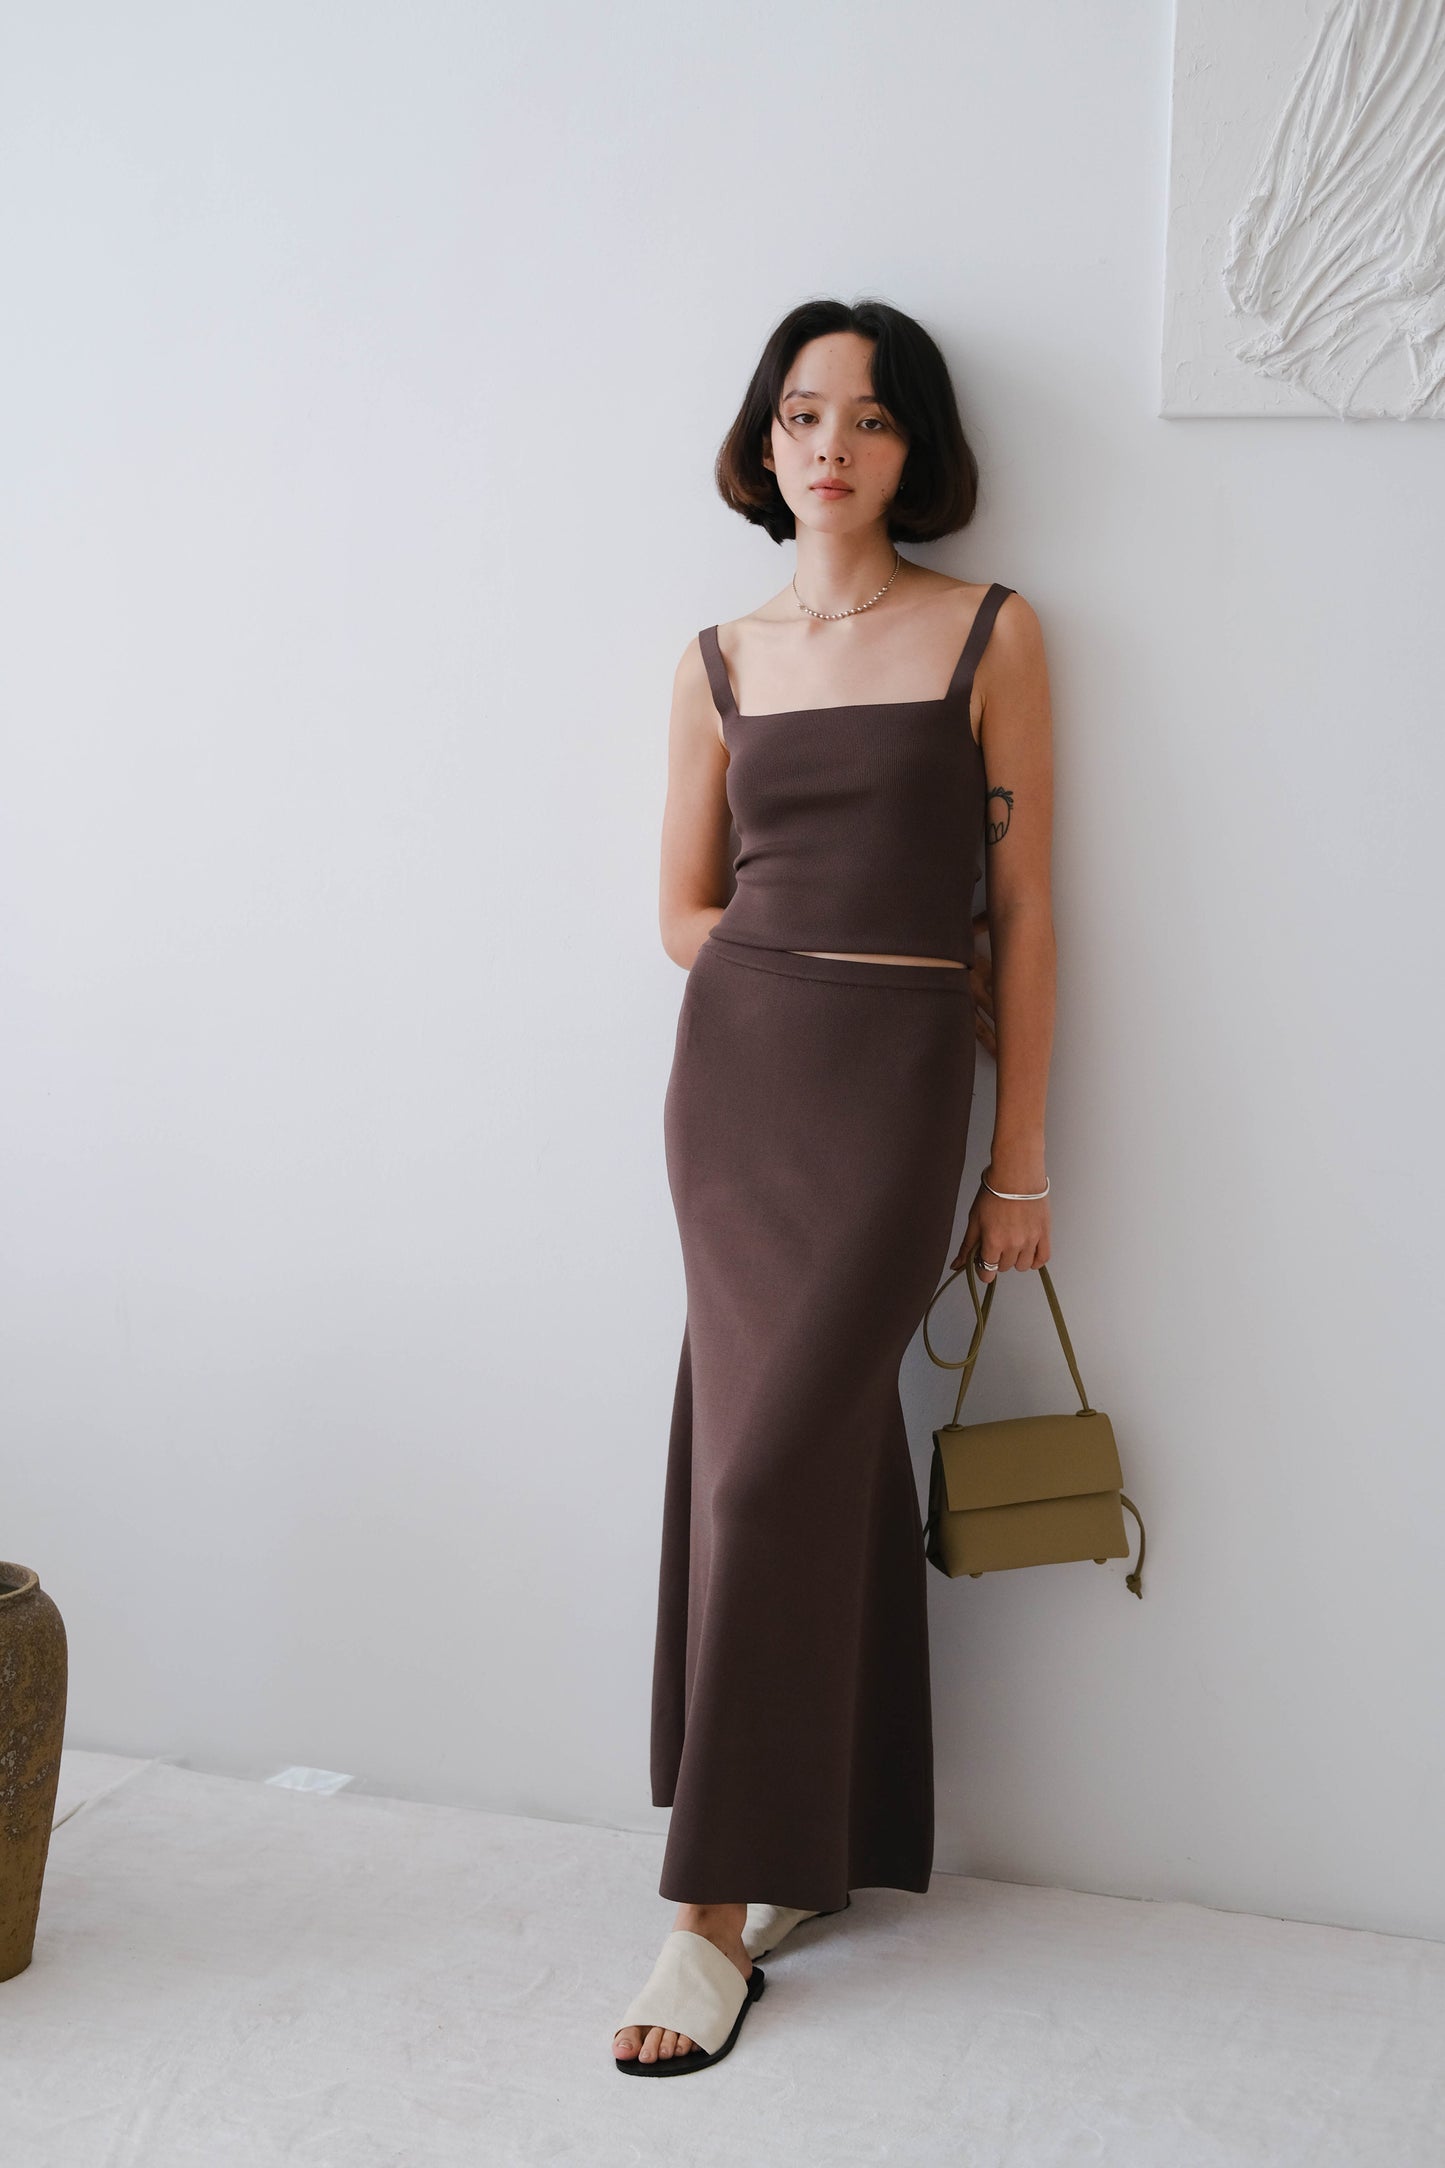 Fishtail skirt in Soot Color